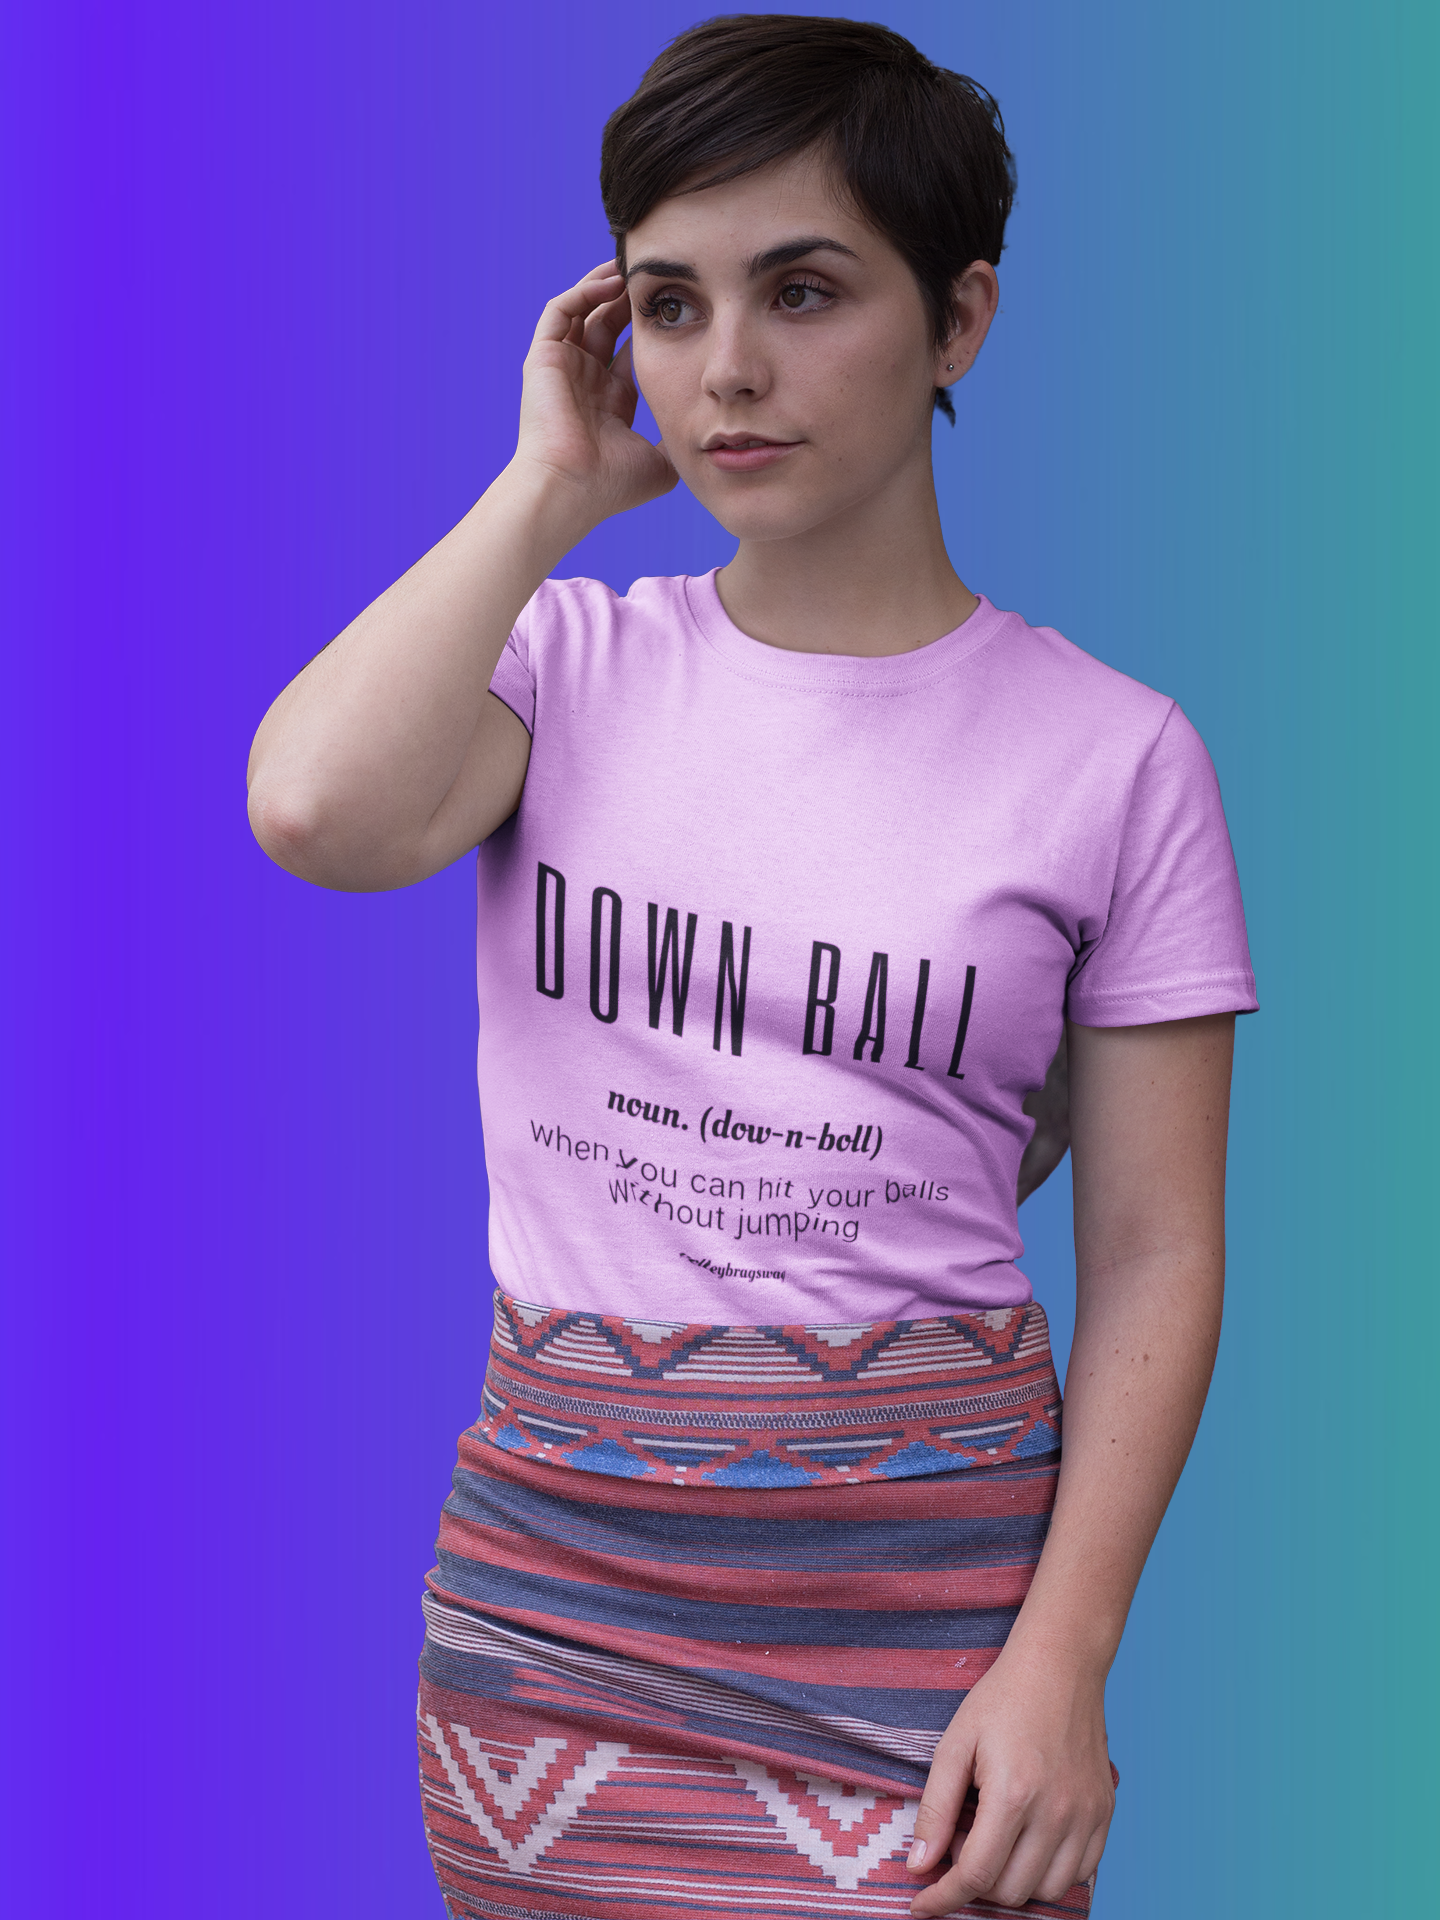 I created a line of cool volleyball shirts by Volleybragswag which combine popular volleyball slang that players know with the plural form of the word "ball."